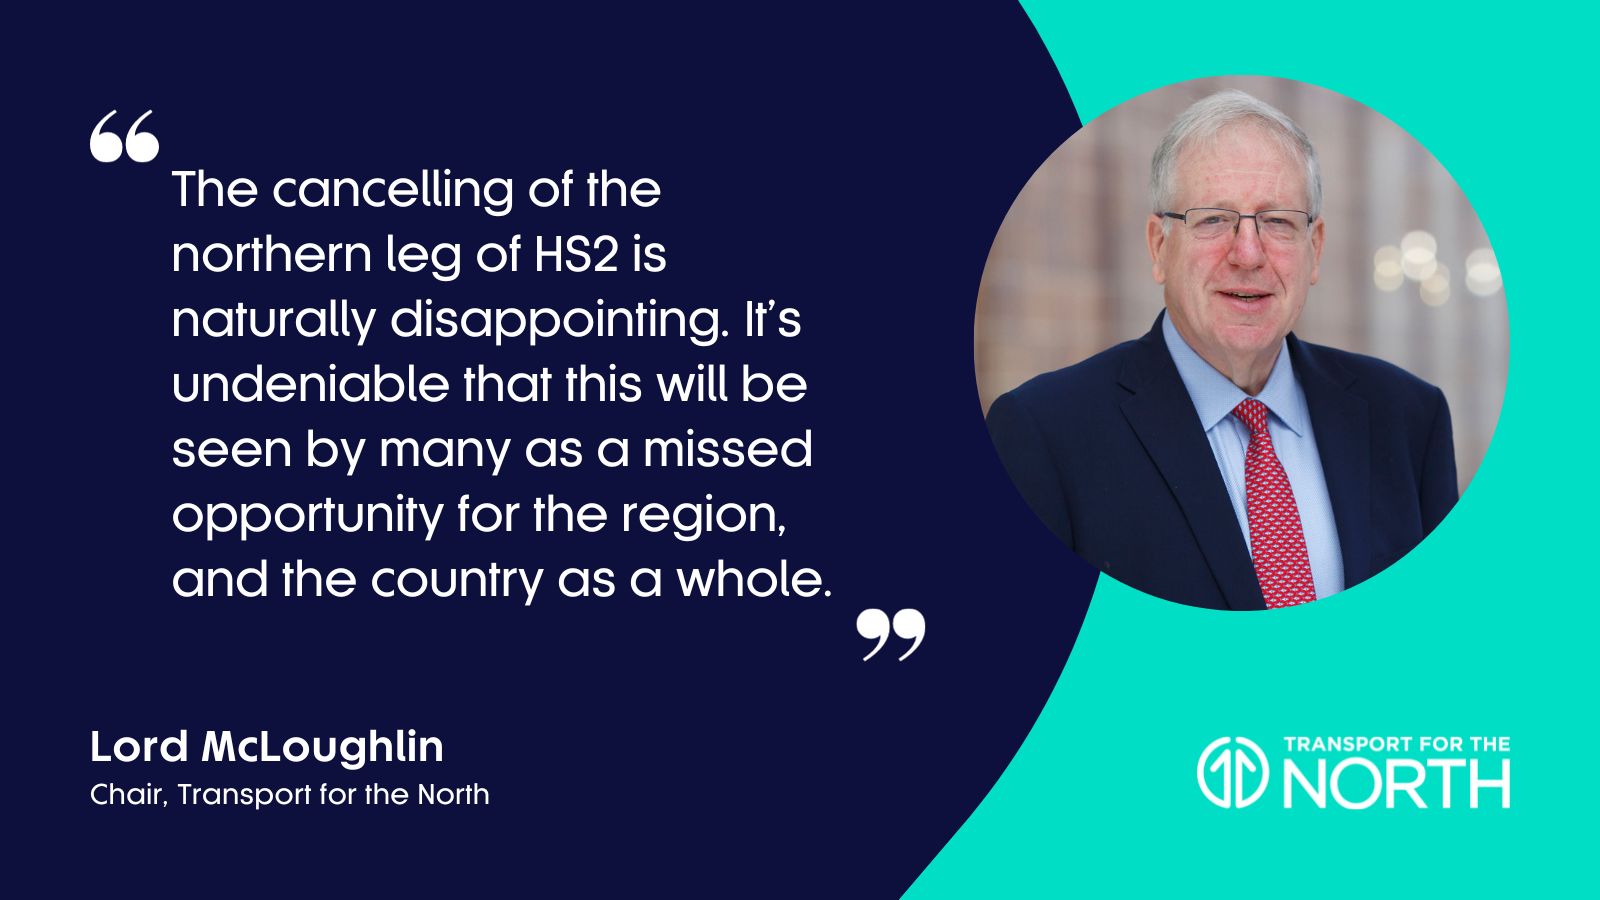 TfN Chair Lord McLoughlin on news HS2 northern leg has been cancelled